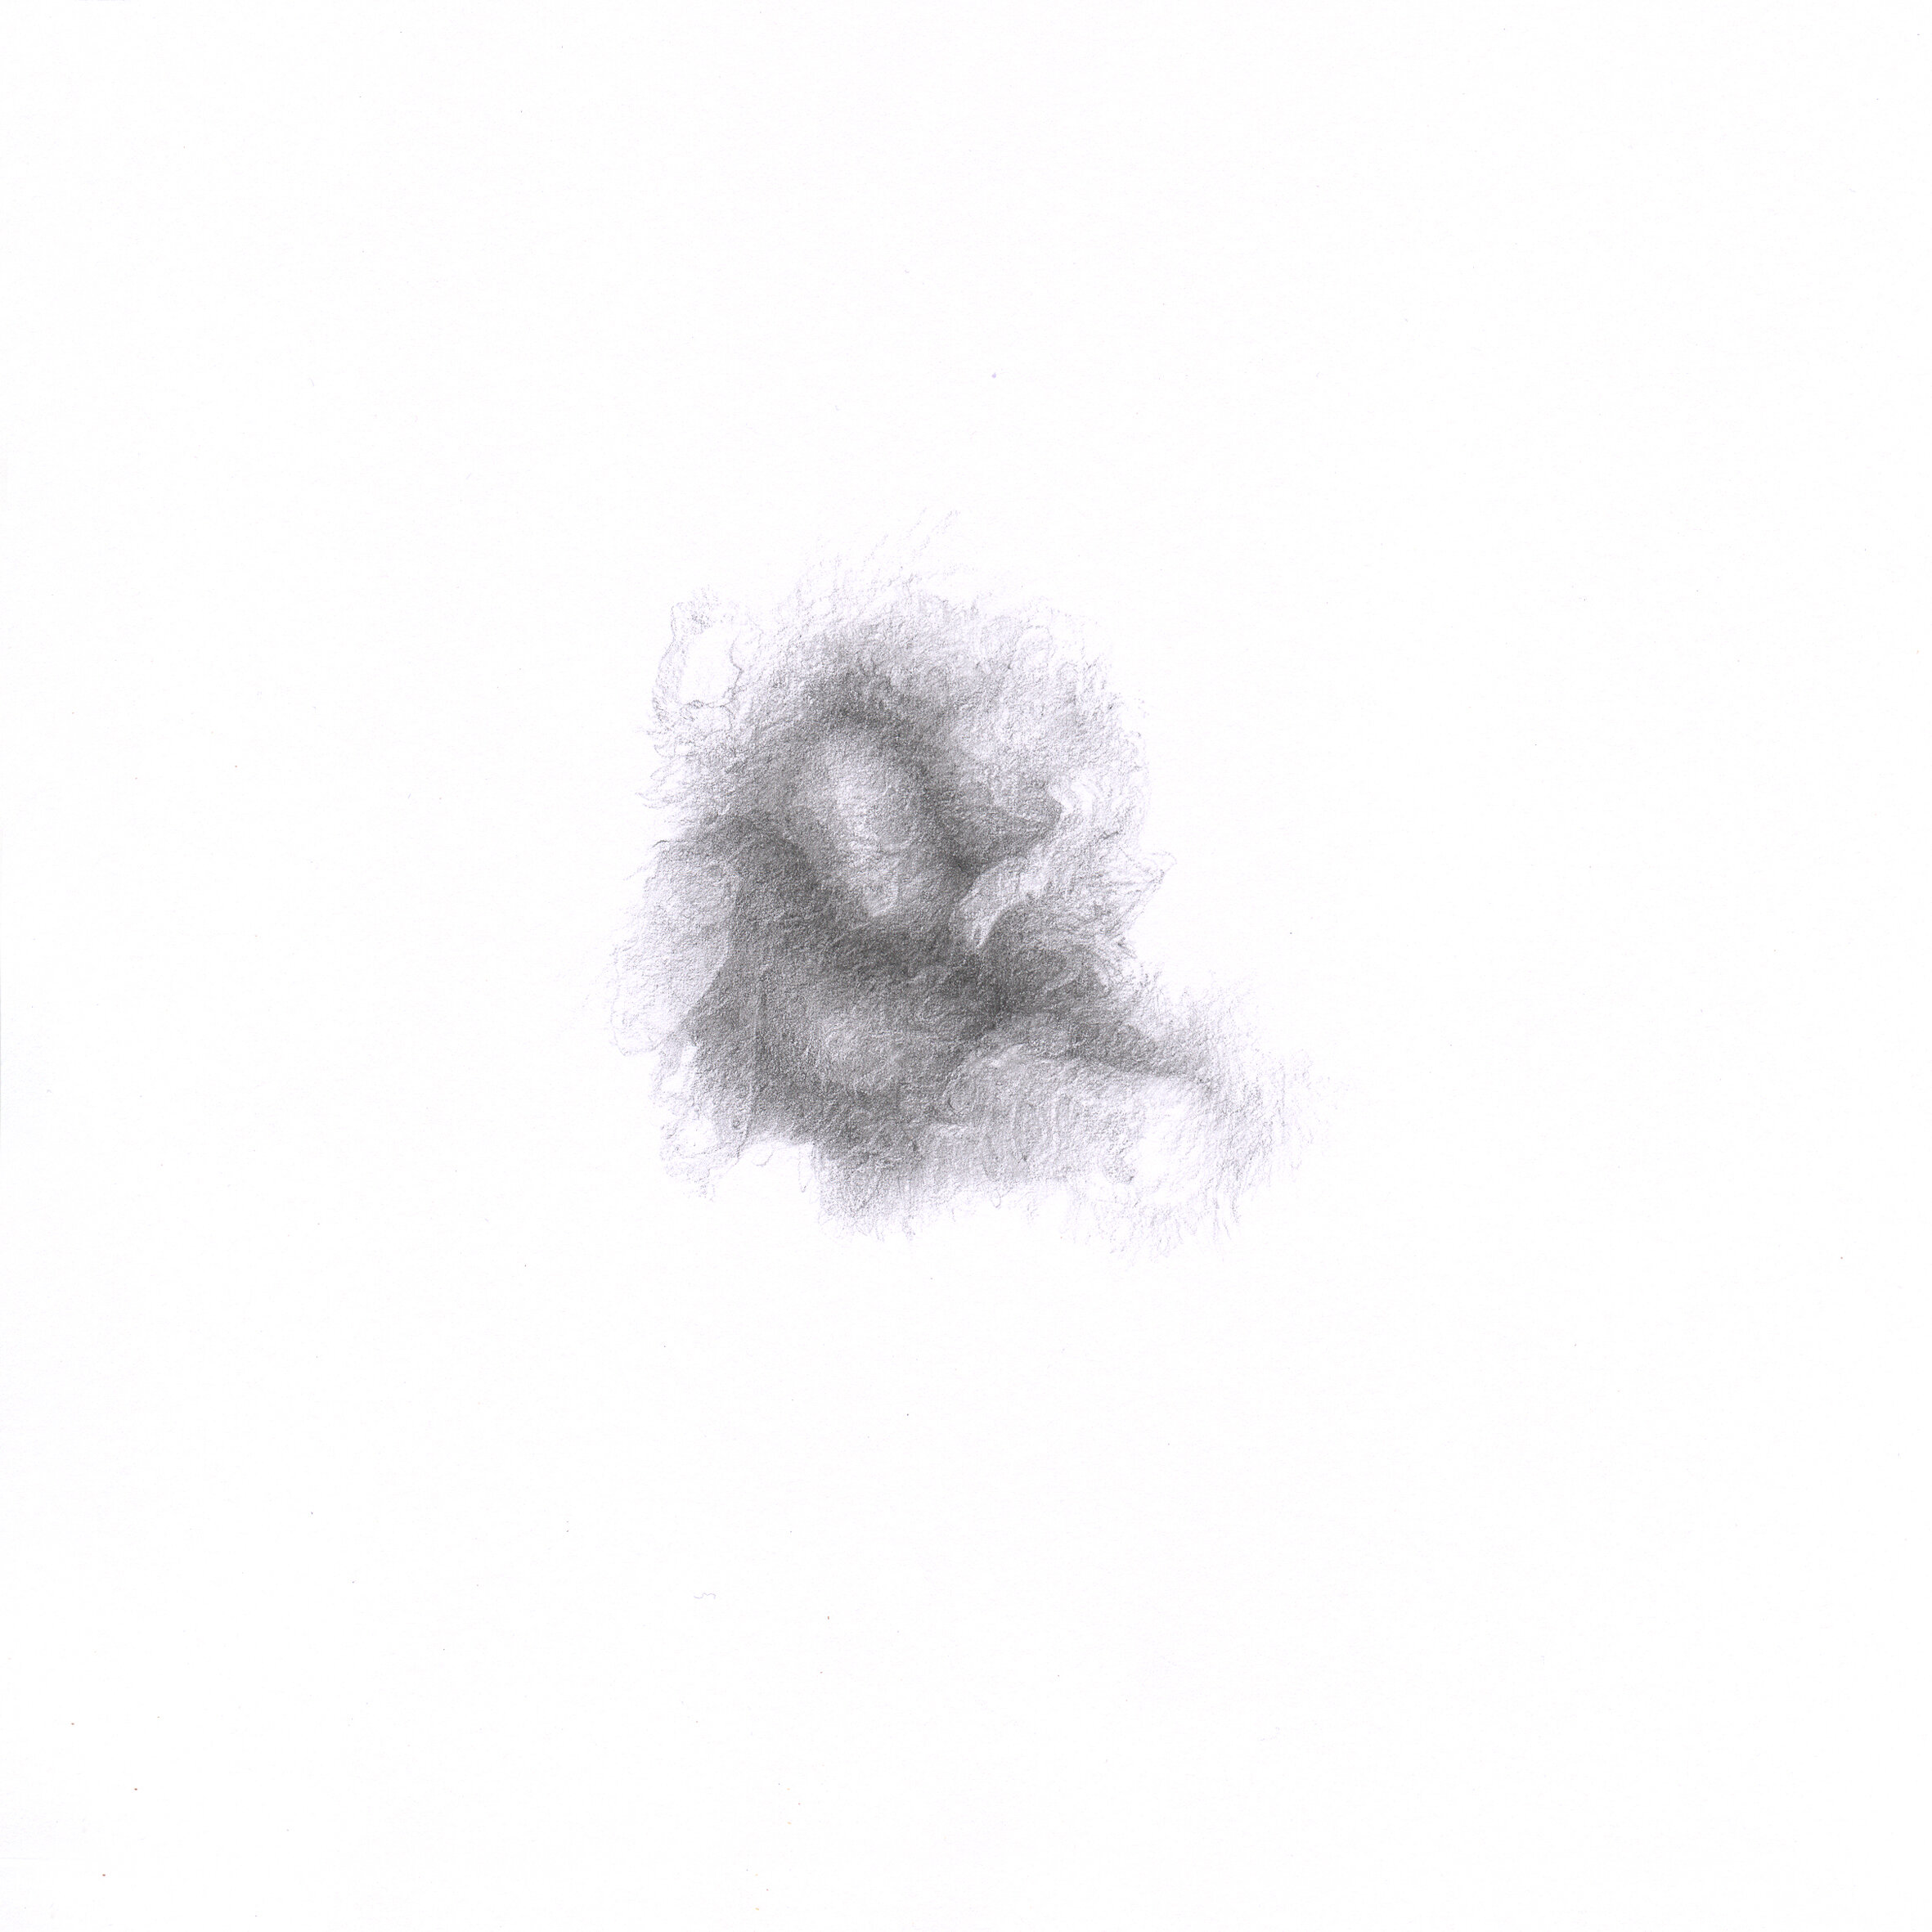  Drawing 07, 2013  Graphite on paper, 21.5 x 21.5 cm 